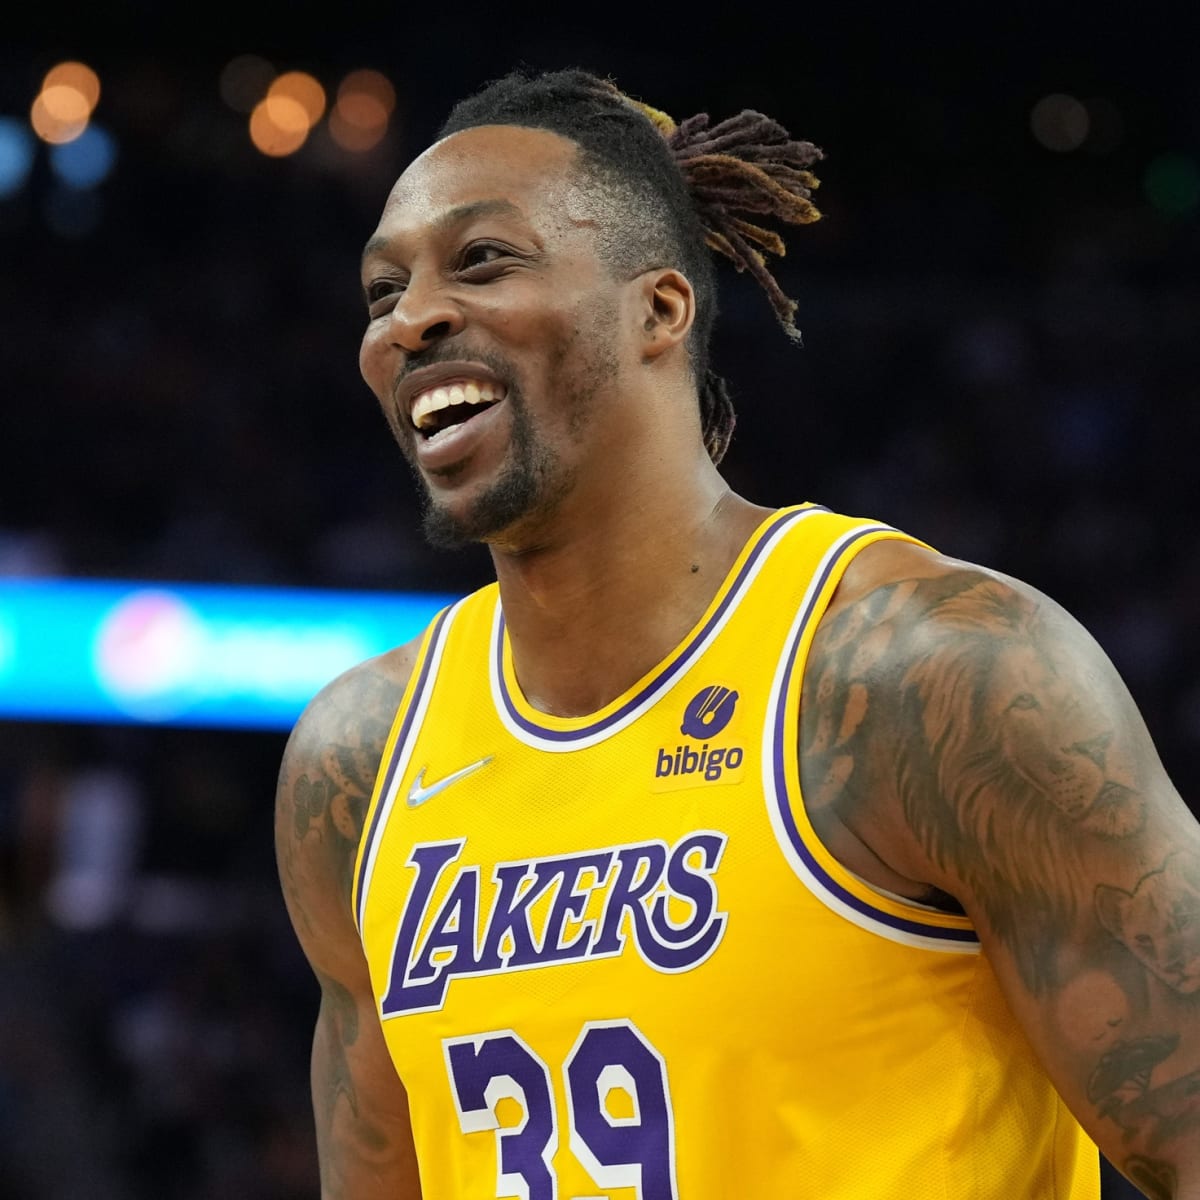 Watch Former Laker Dwight Howard Take Part In A 3-Point Contest in Taiwan -  All Lakers